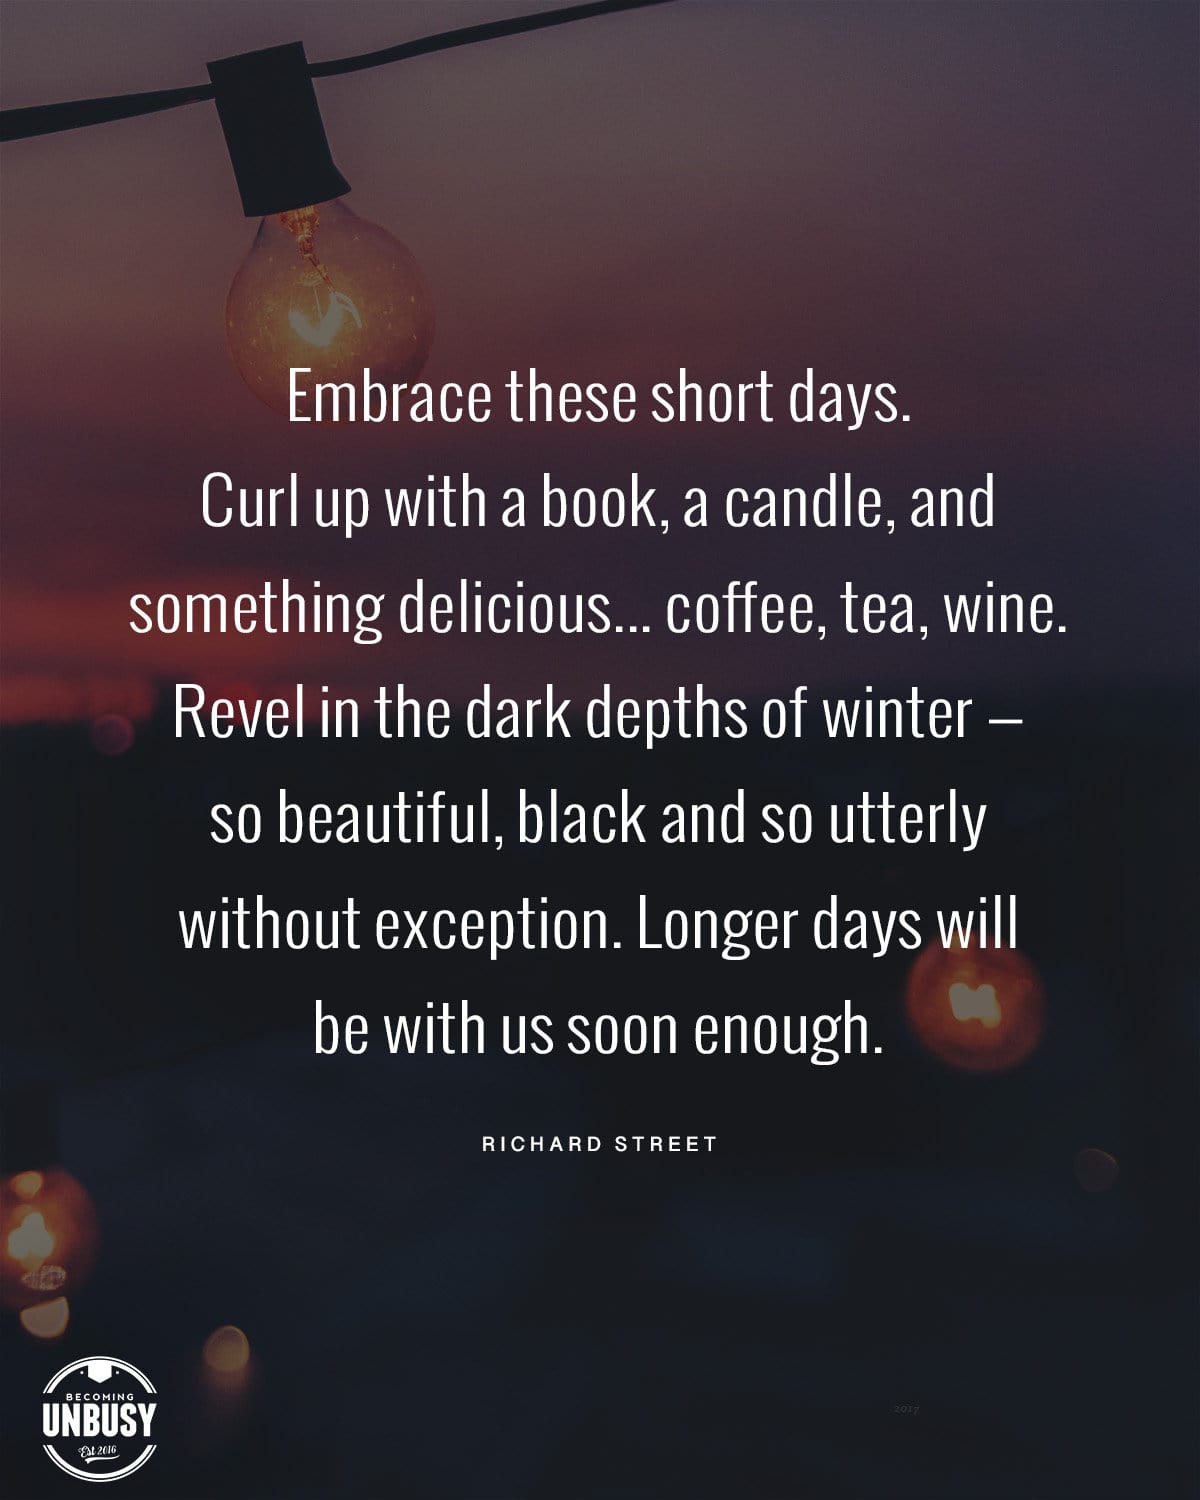 Embrace these short days. Curl up with a book, a candle, and something delicious... coffee, tea, wine. Revel in the dark depths of winter so beautiful, black and so utterly without exception. Longer days will be with us soon enough.

